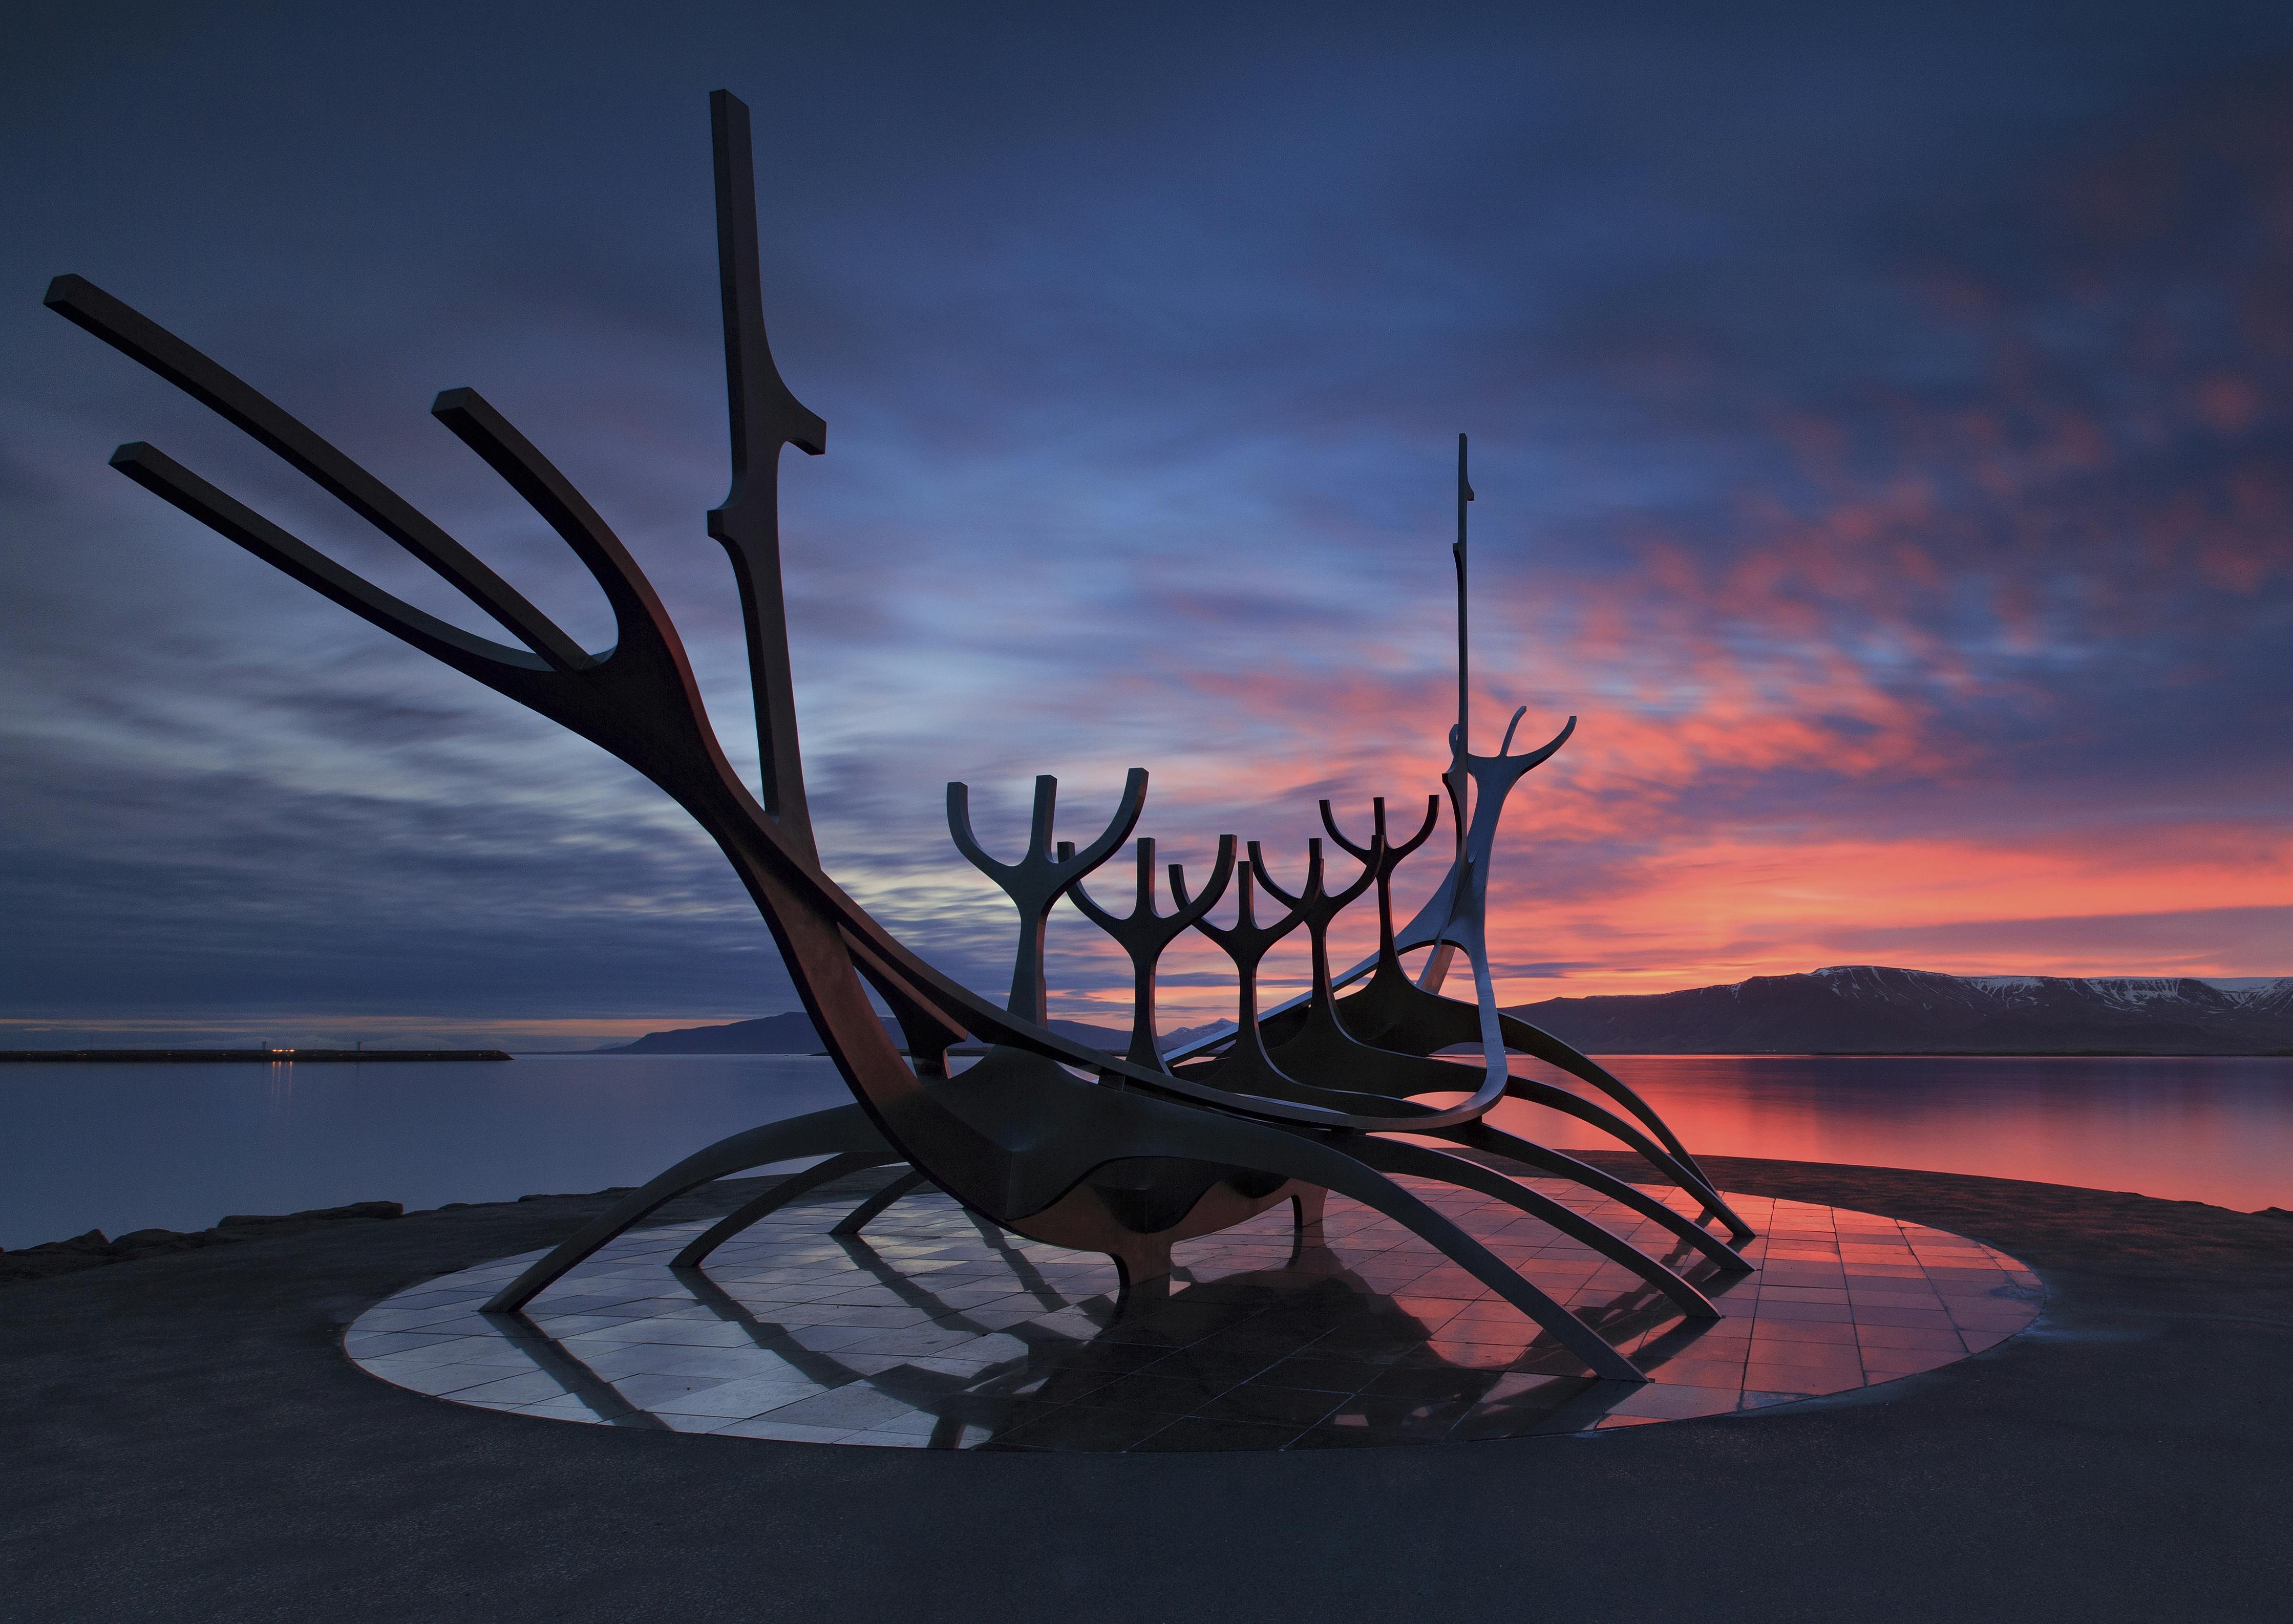 The Sun Voyager is located in Reykjavik city centre